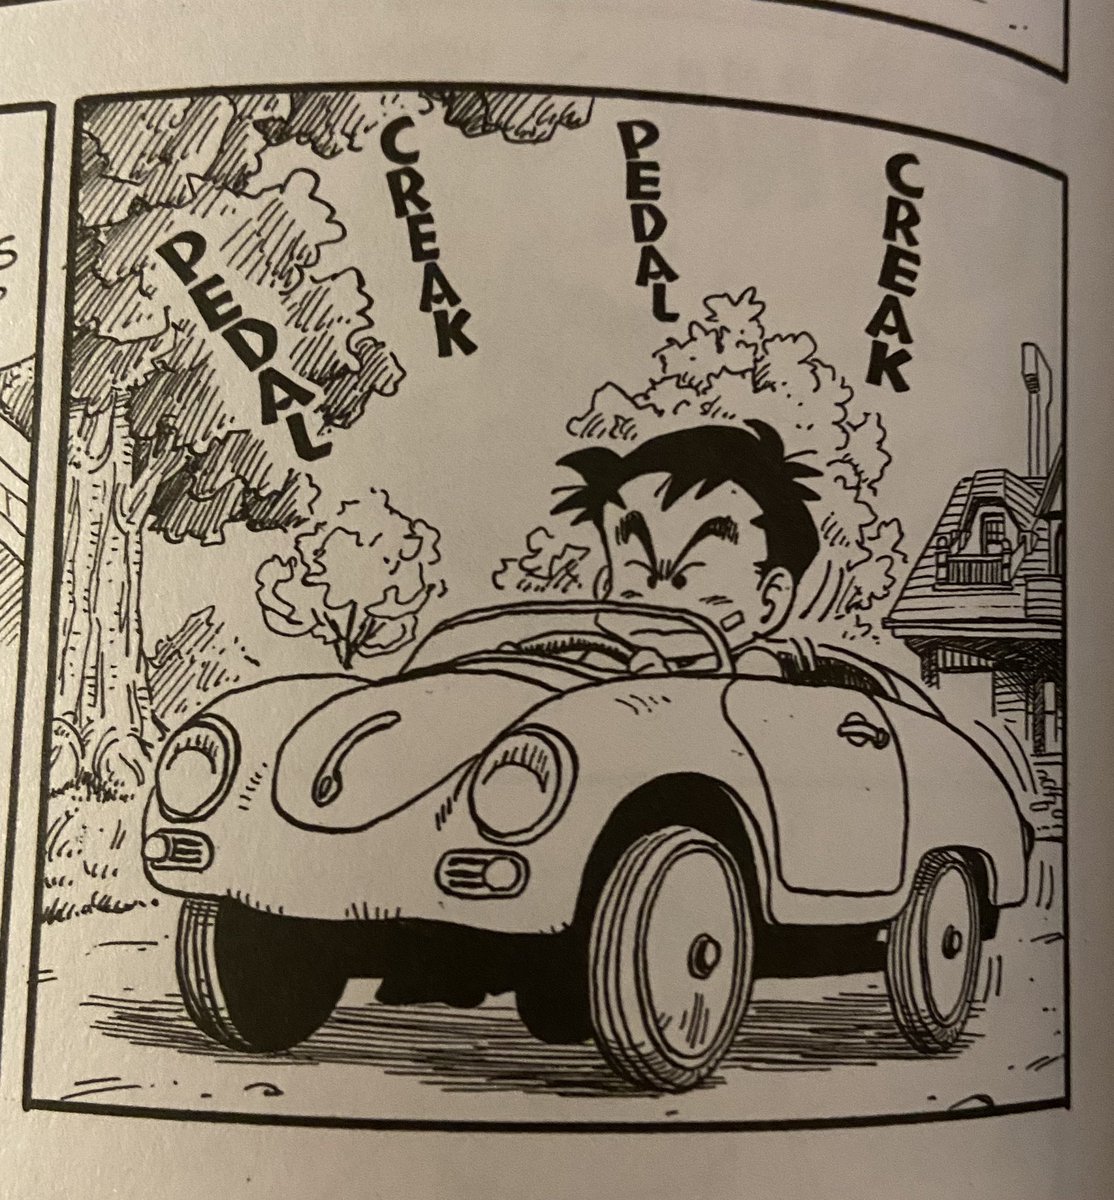 it's been incredible seeing the love for Toriyama on the timeline. I love his cars 